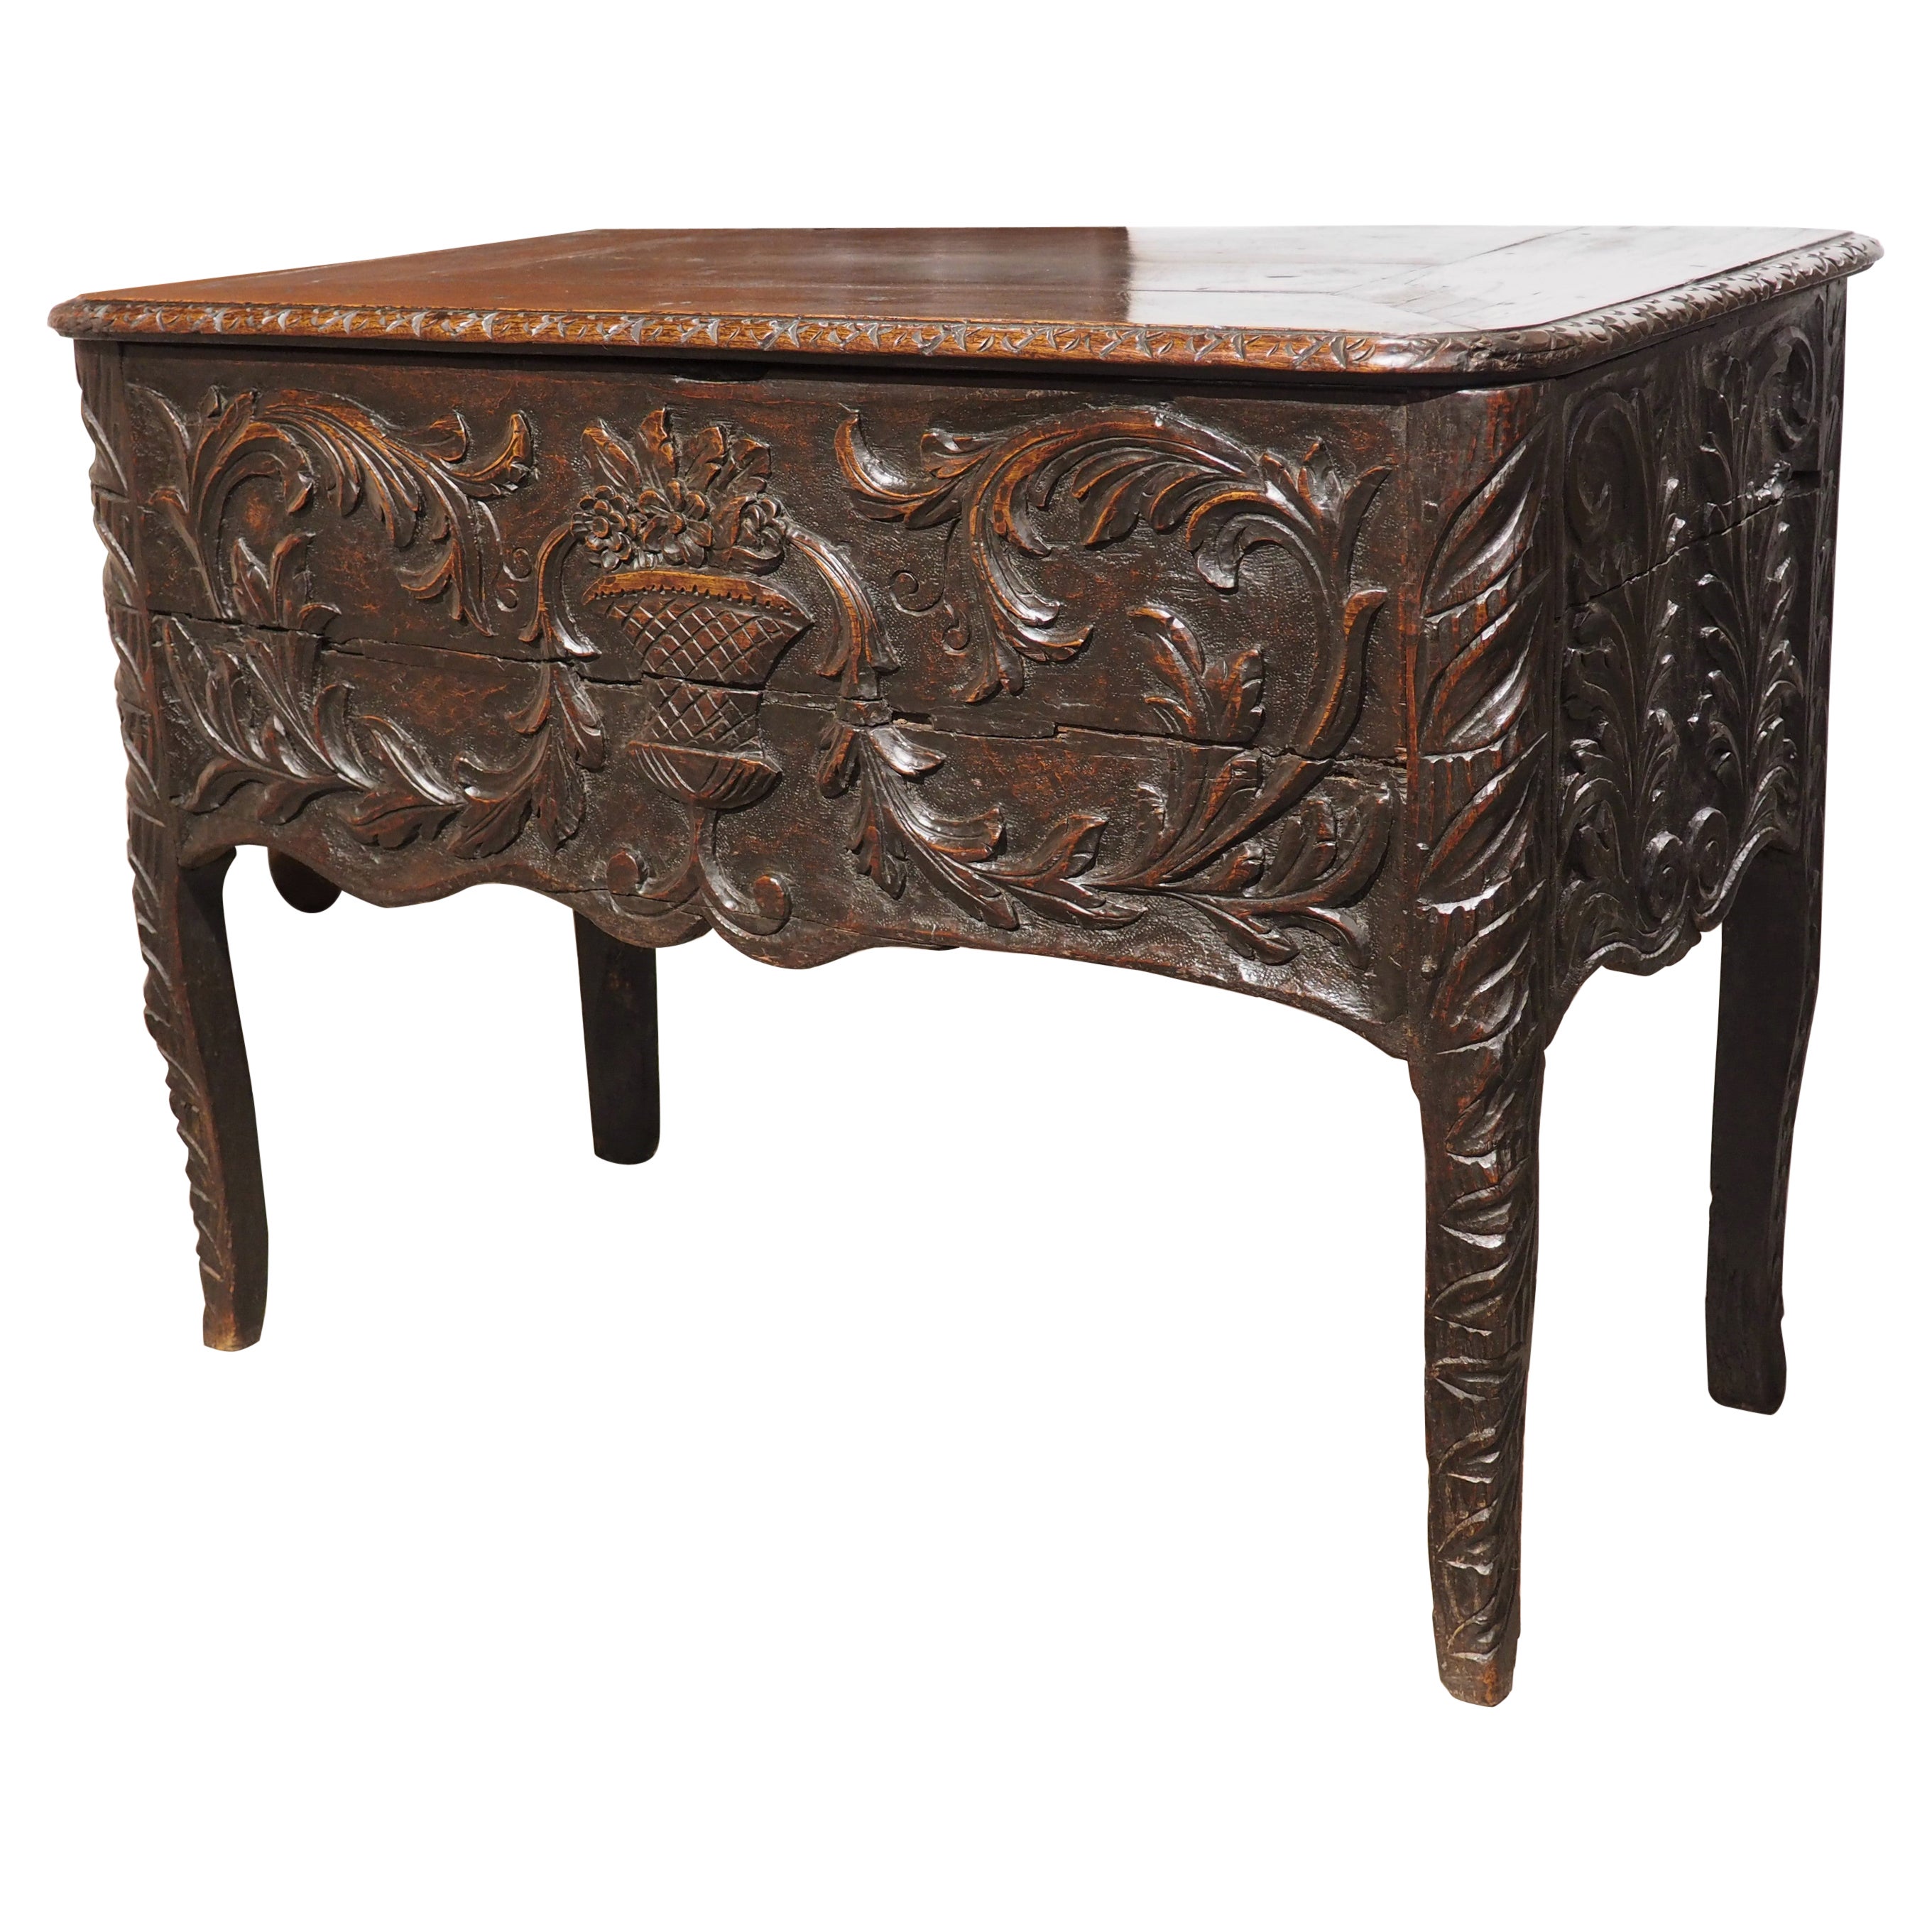 A Well-Carved 18th Century "Maie" Console/Trunk from Provence, France